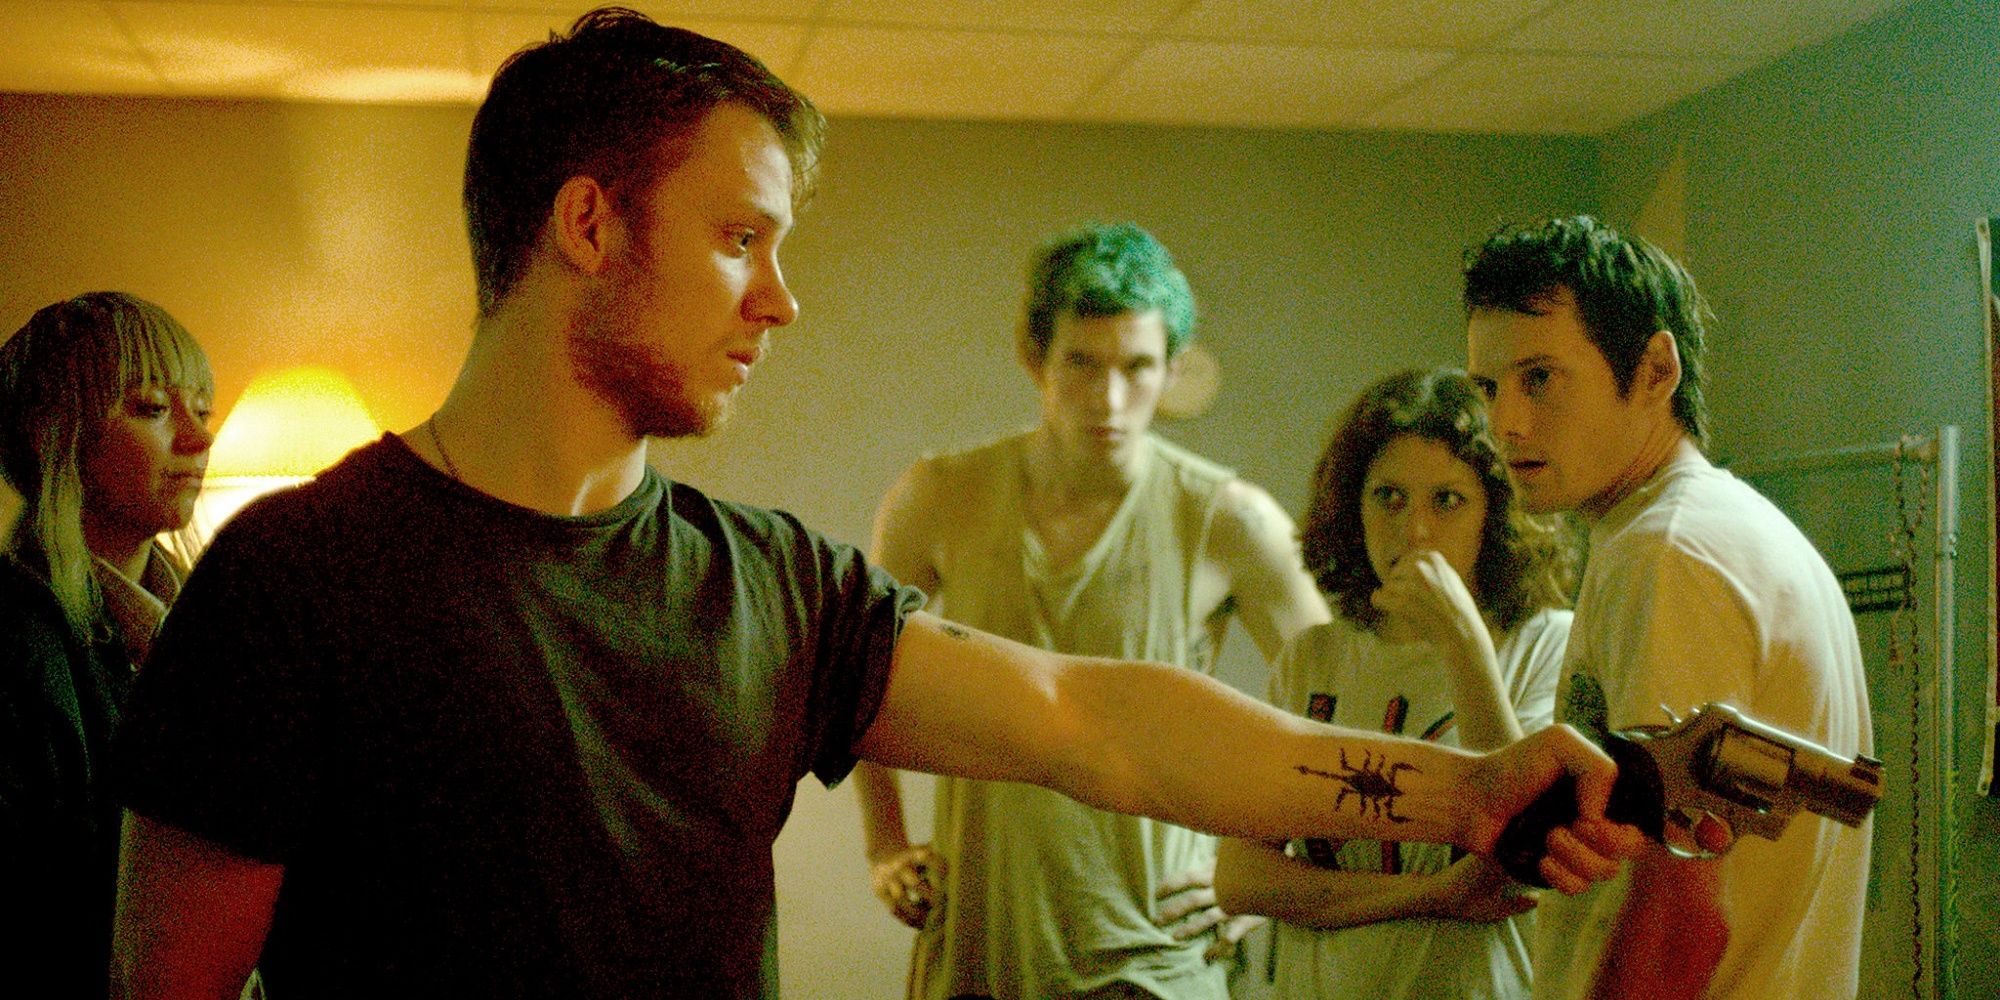 Joe Cole's character, Reece, pointing a gun at someone off screen in 'Green Room.'